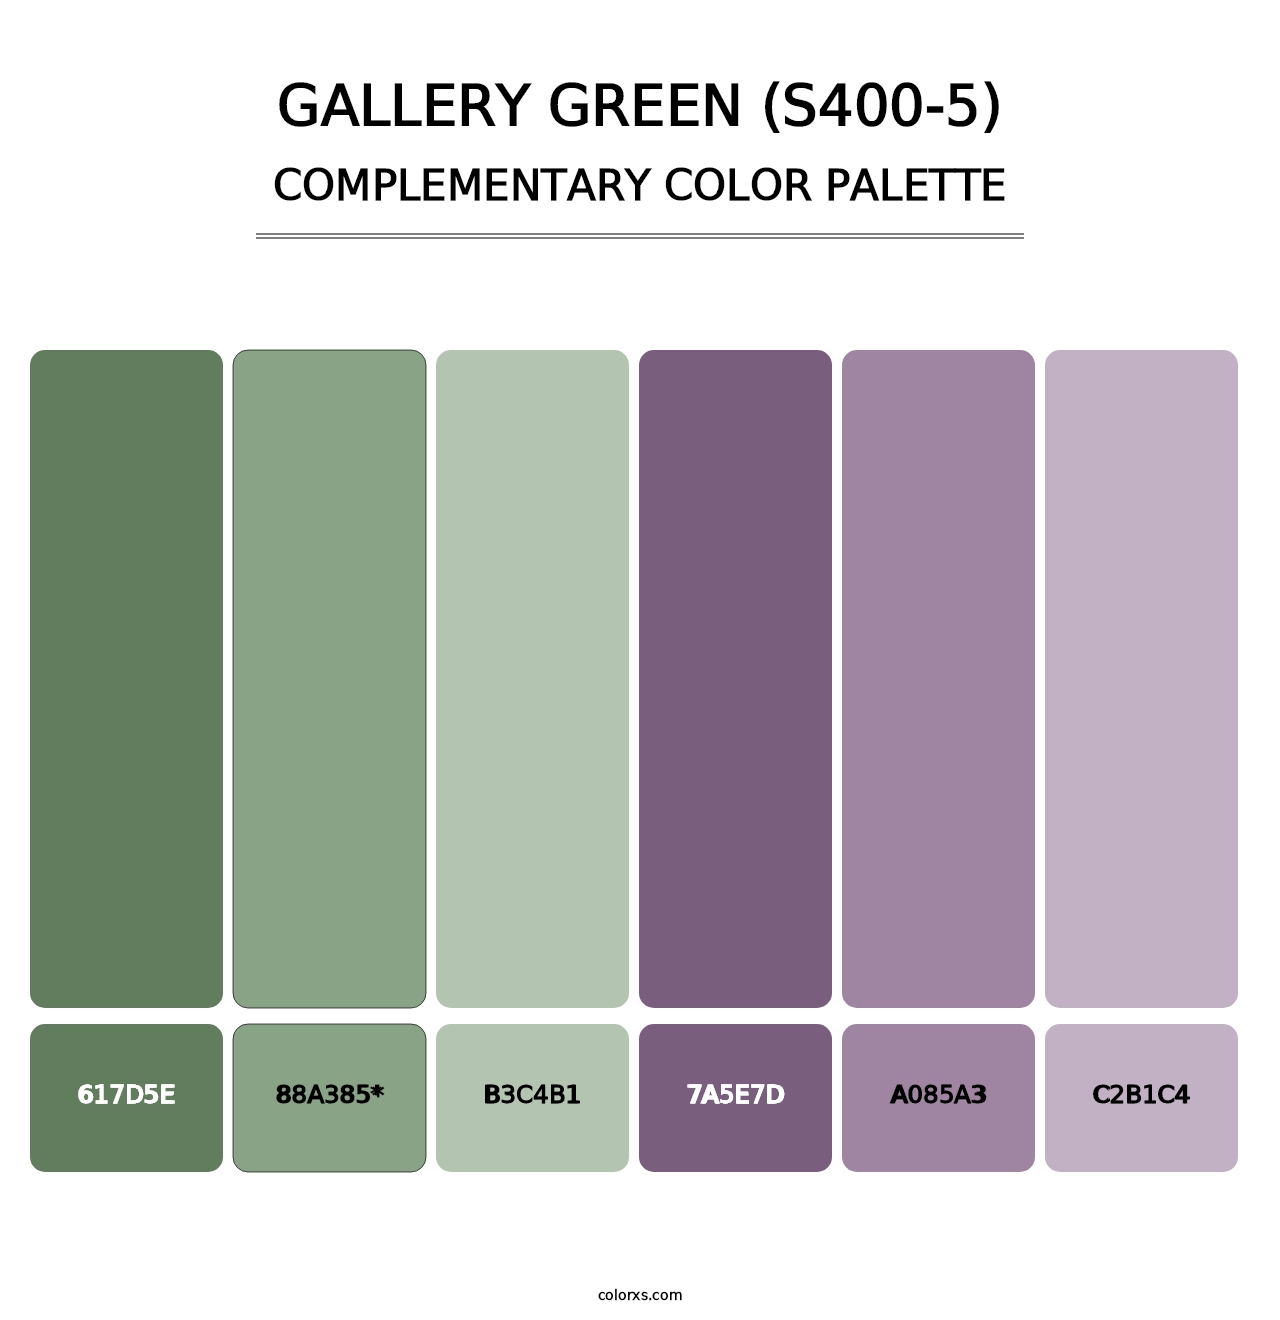 Gallery Green (S400-5) - Complementary Color Palette